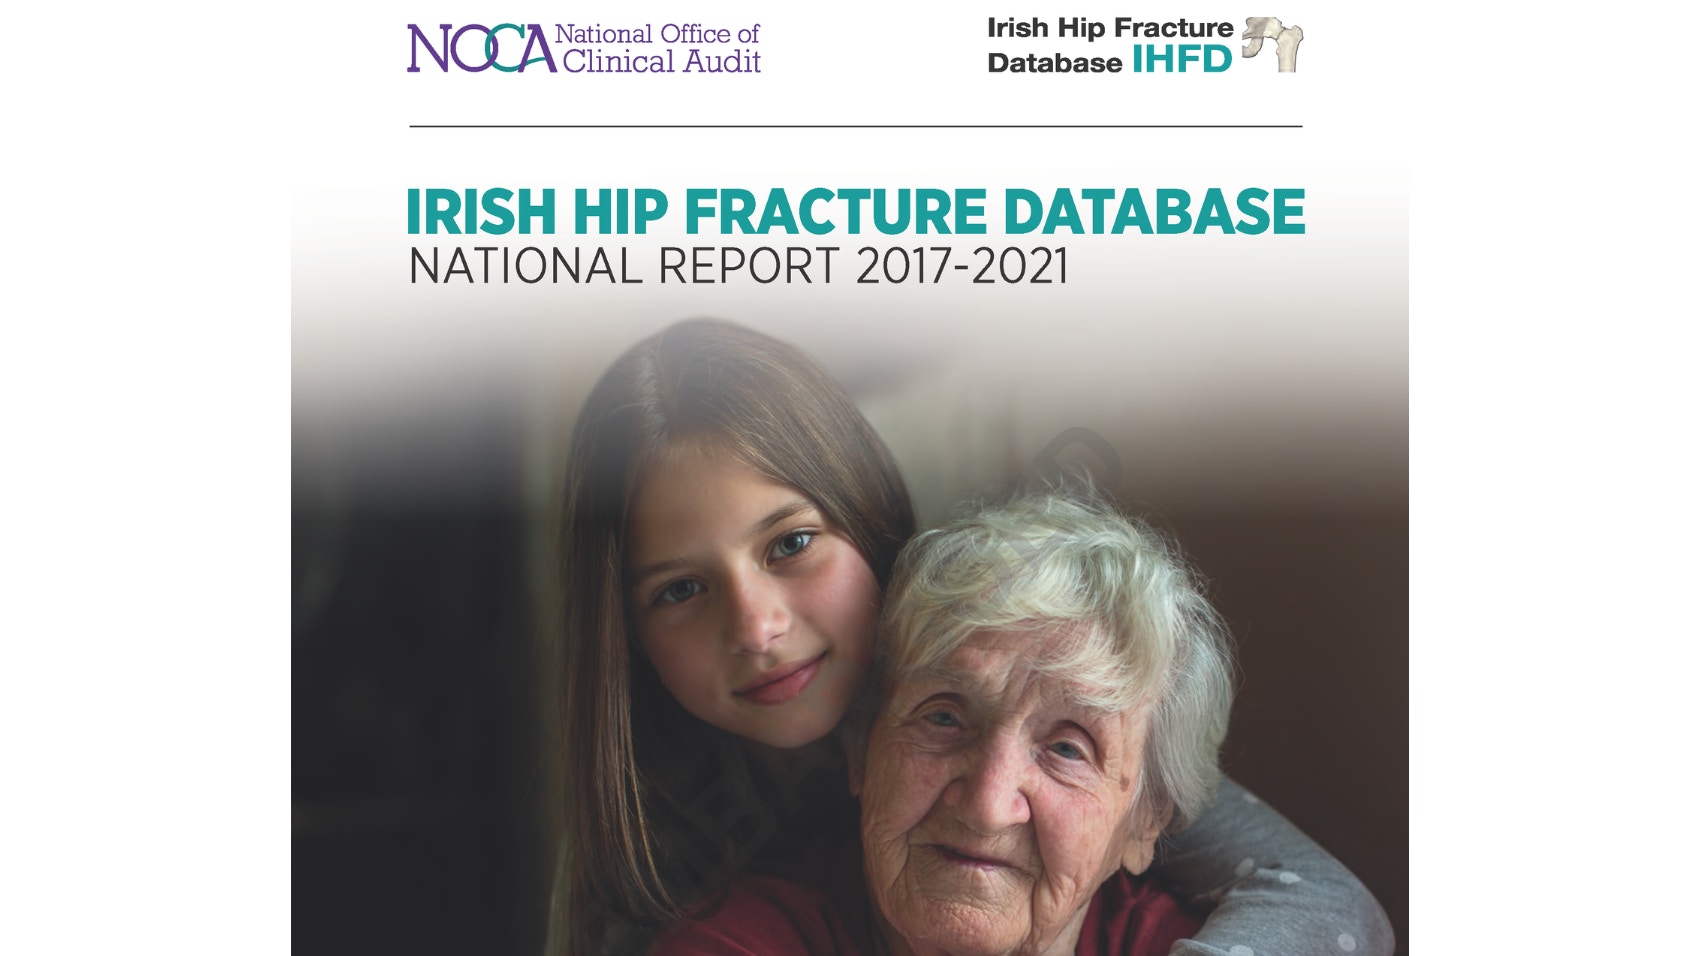 Registration for the Irish Hip Fracture Meeting 2022